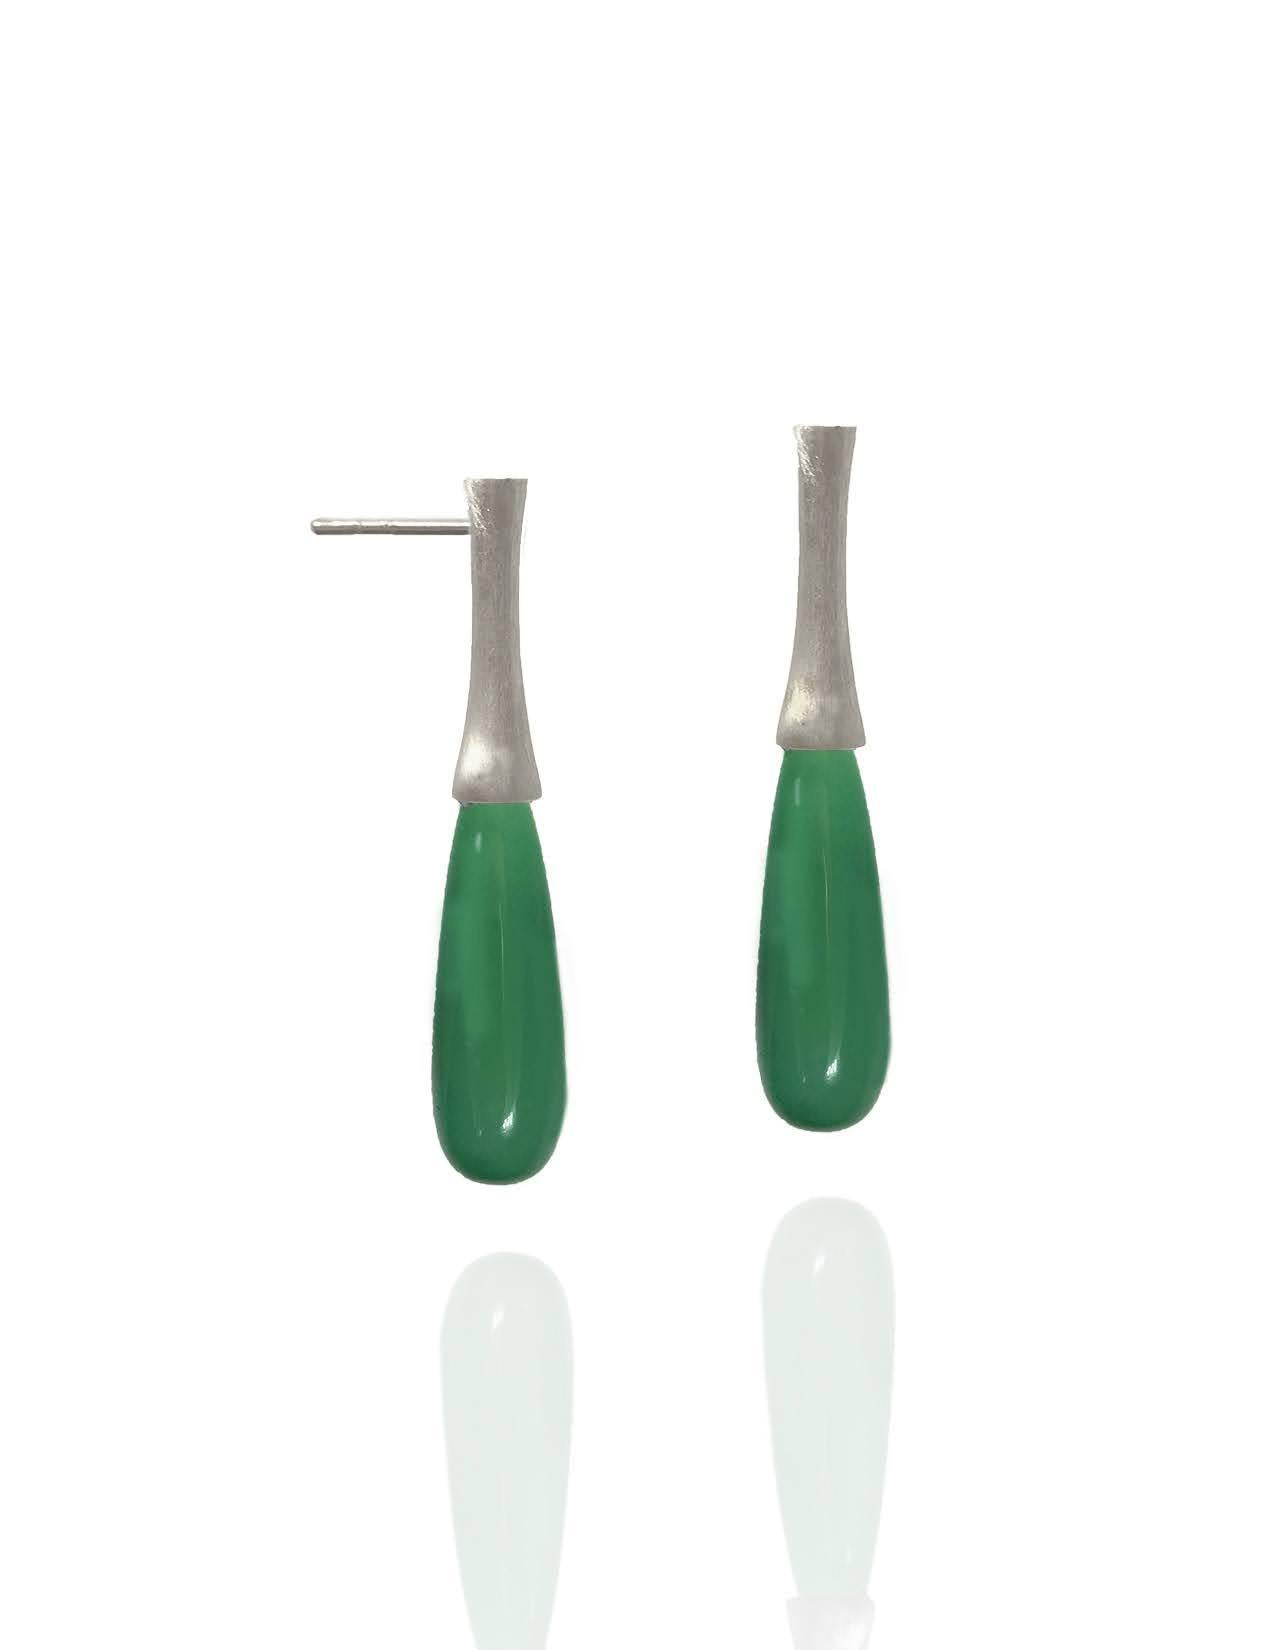 Long and elegant, these one-of-a-kind contemporary Chrysoprase drops are set in brushed silver. Earrings have a post and medium back. A perfect pop of color, these green drops are 41 carats in total weight. Total length of each earring is 2 inches,